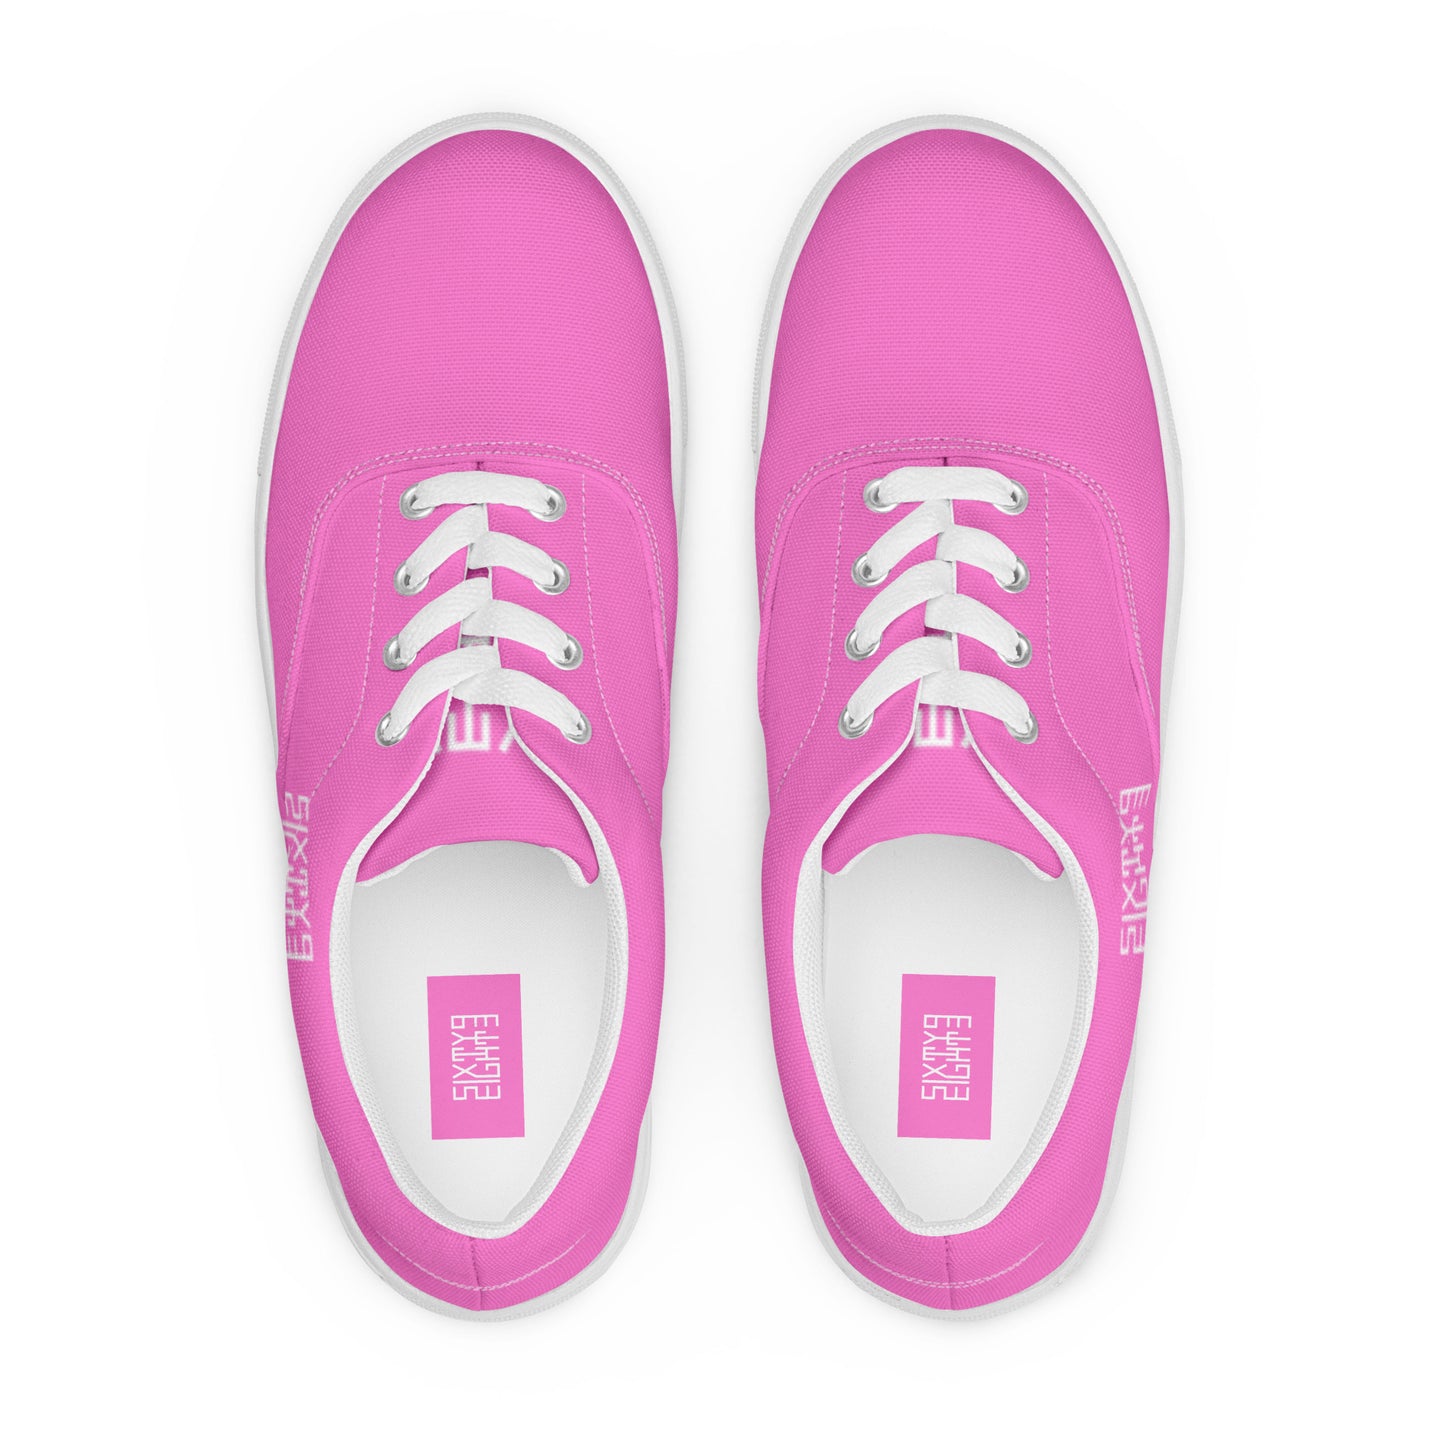 Sixty Eight 93 Logo White & Pink Women's Low Top Shoes